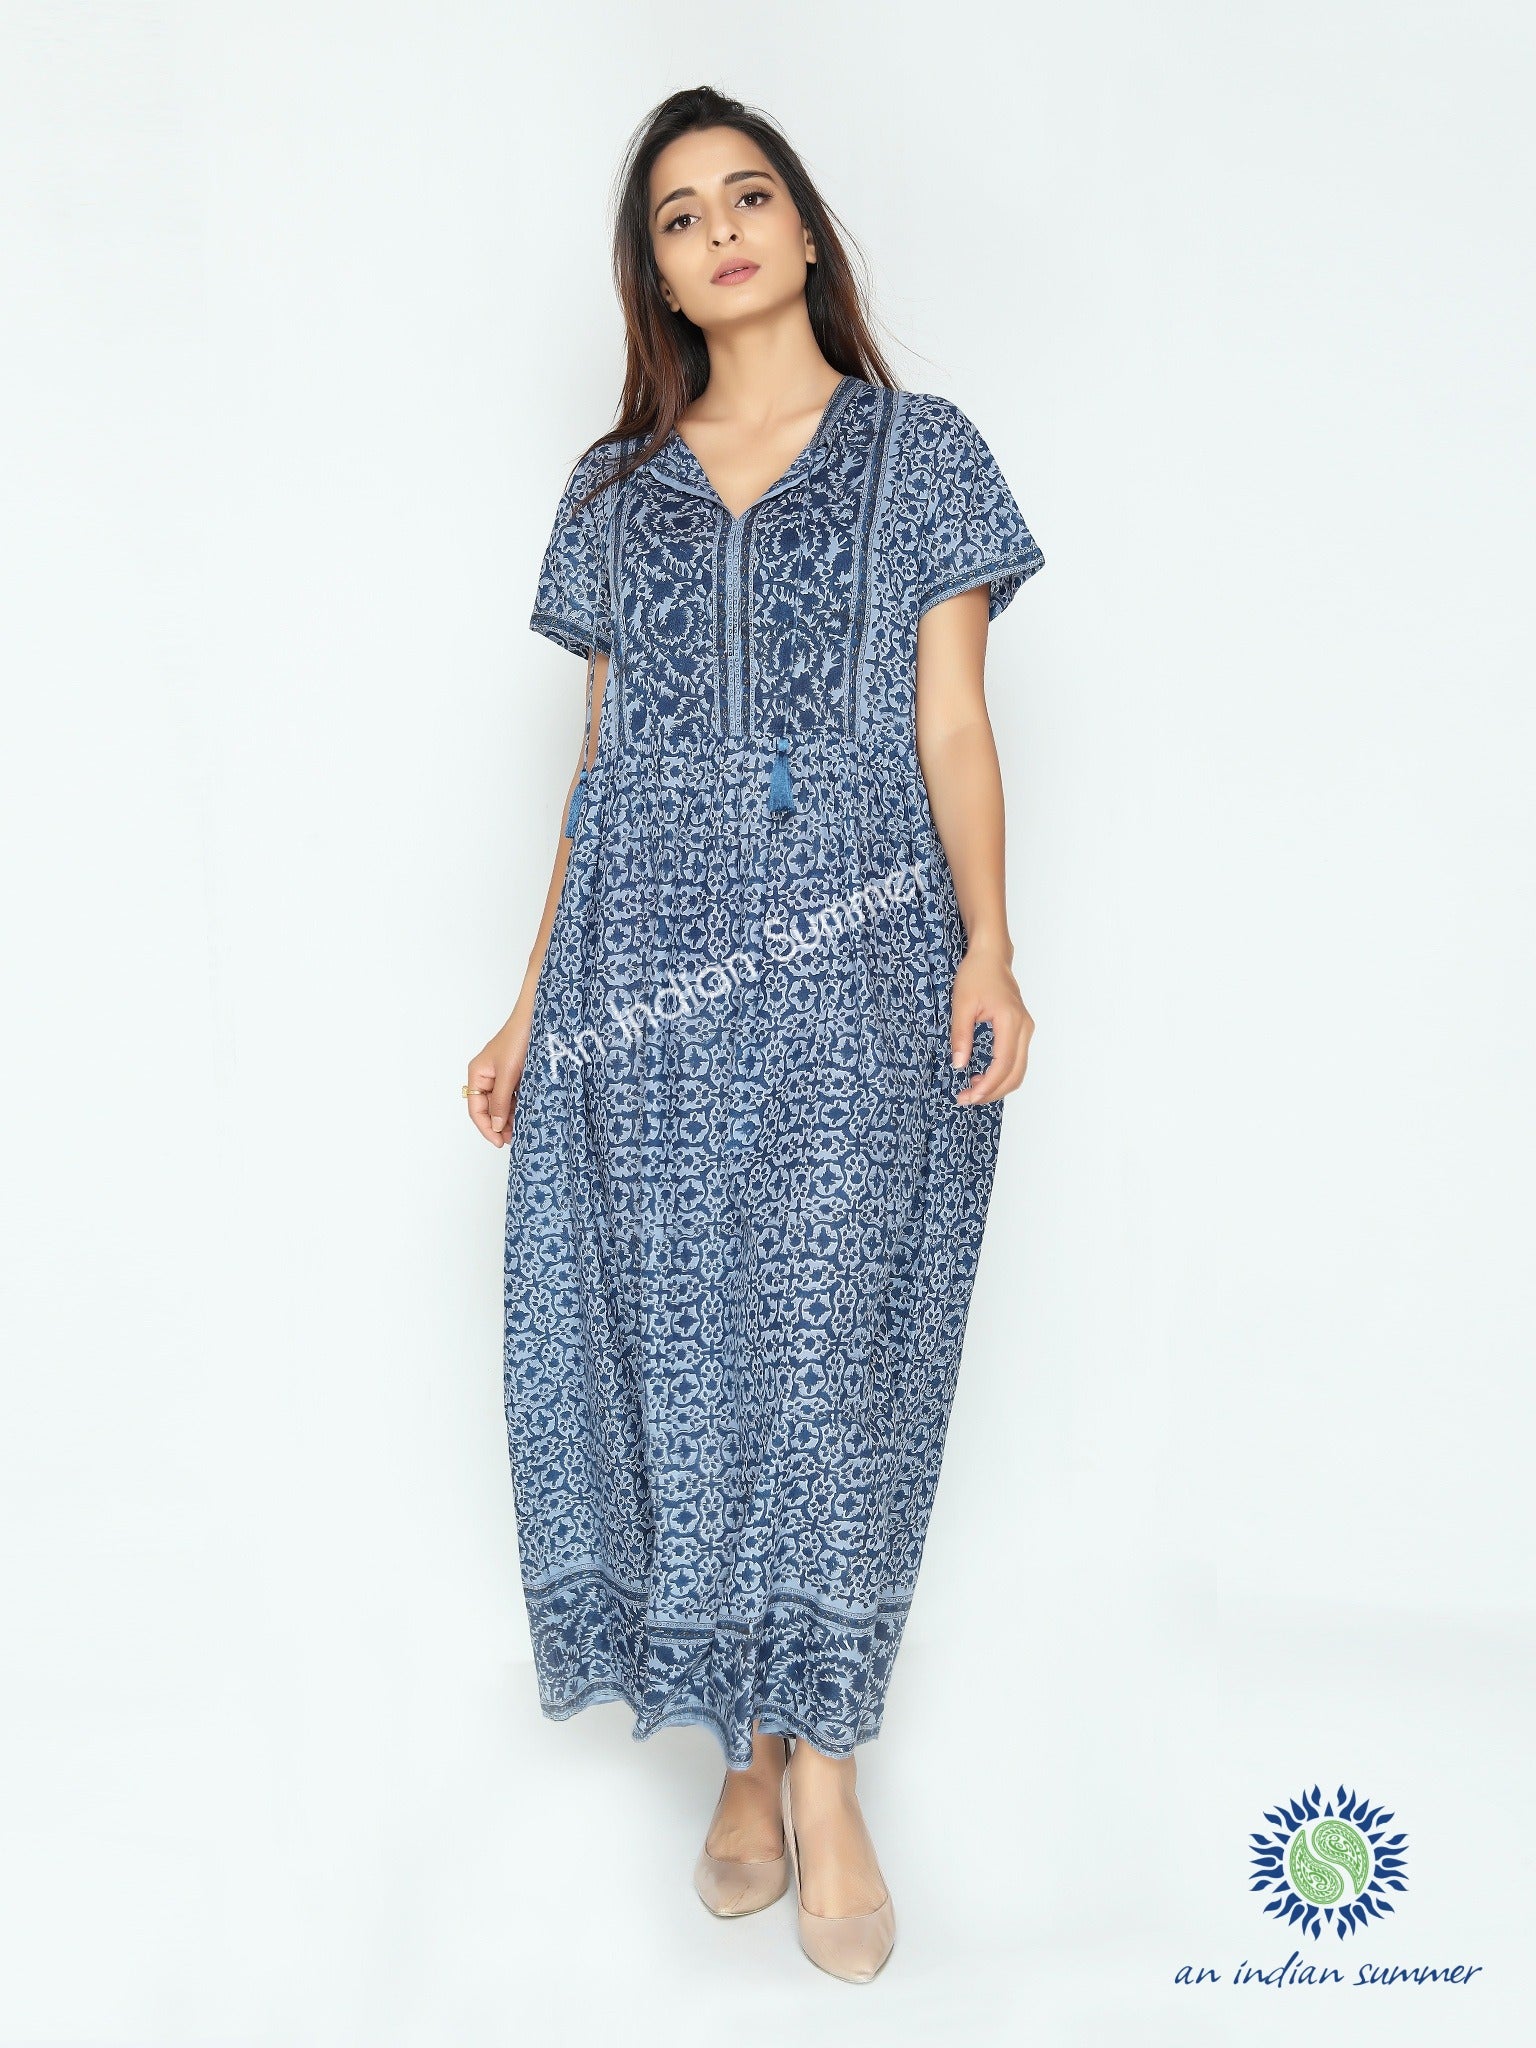 Lilia Dress | Blue | Floral Print | Block Print Dress | Cotton Voile | An Indian Summer | Seasonless Timeless Sustainable Ethical Authentic Artisan Conscious Clothing Lifestyle Brand